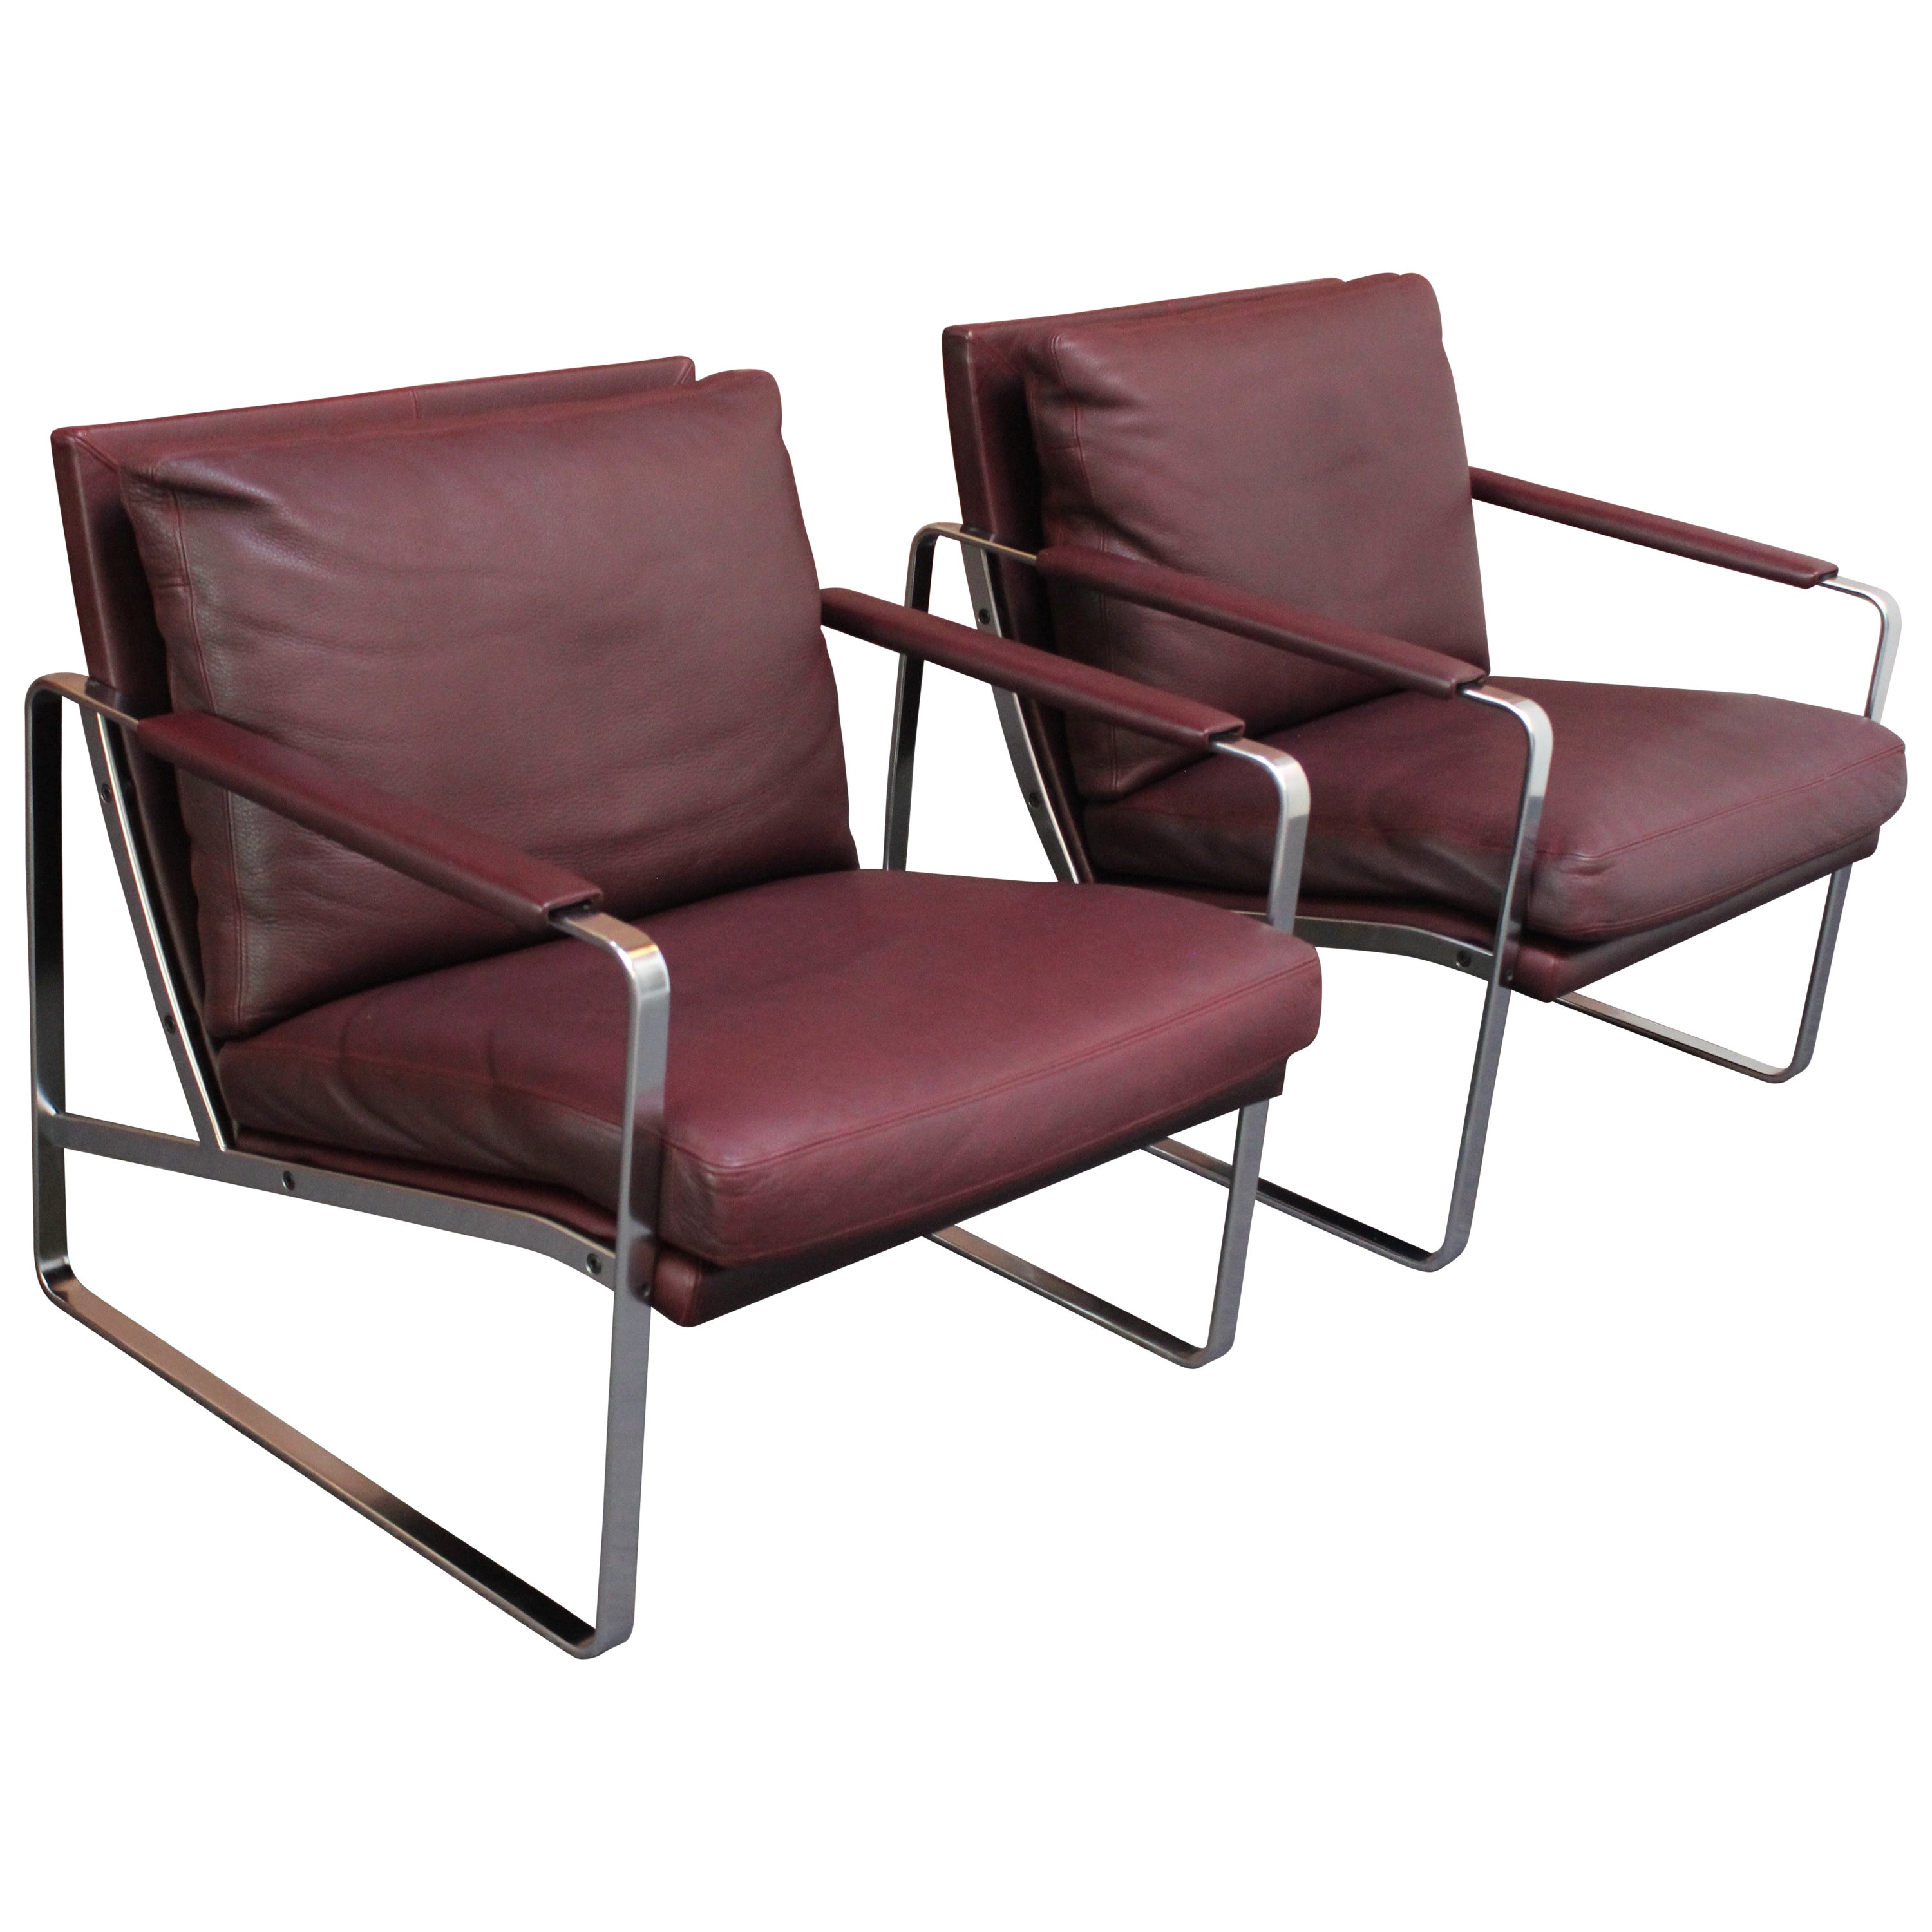 Pair of Preben Fabricius for Walter Knoll Cordovan Leather Lounge Chairs For Sale